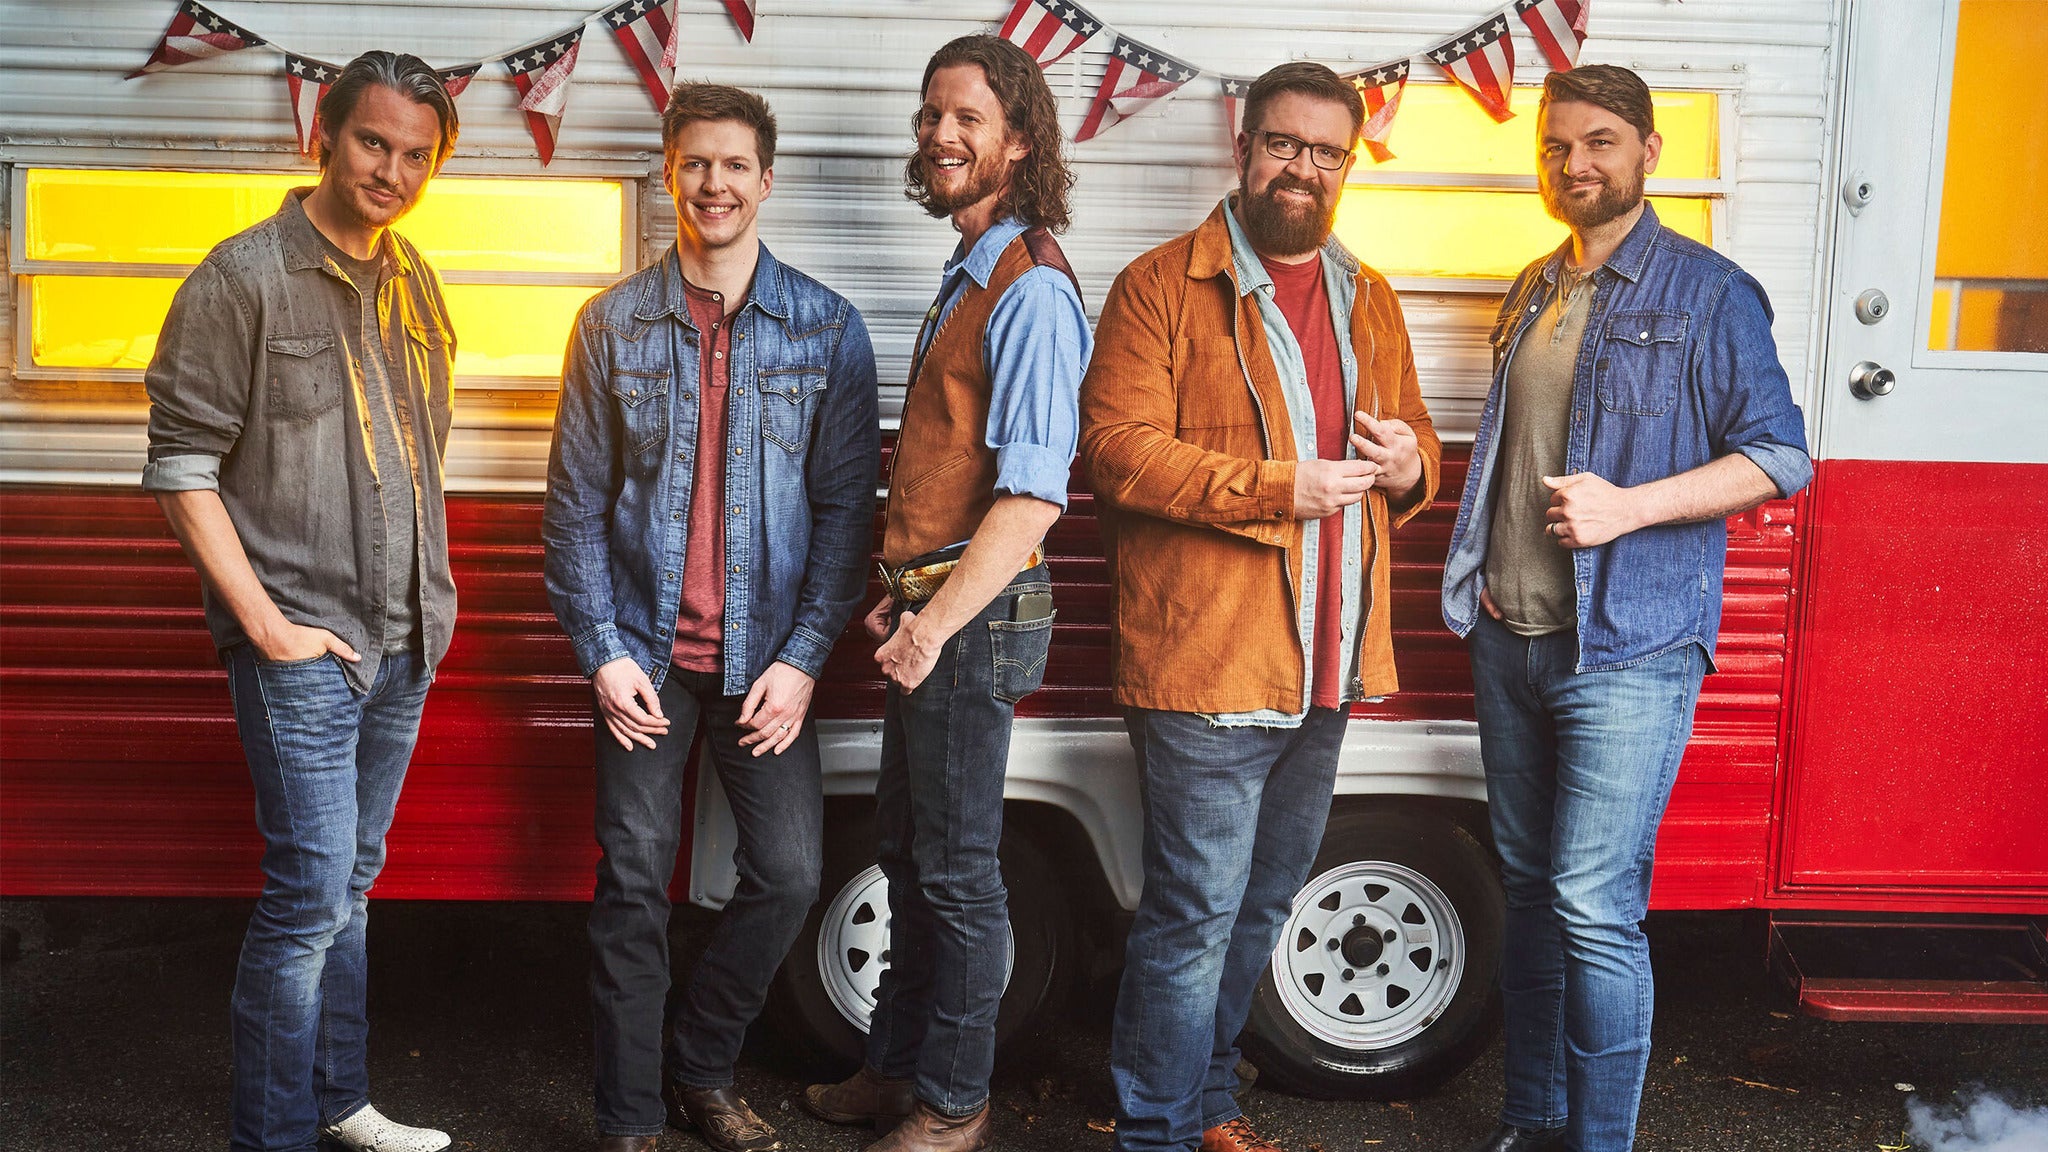 Home Free: Road Sweet Road Tour presale code for event tickets in Little Rock, AR (Robinson Performance Hall)